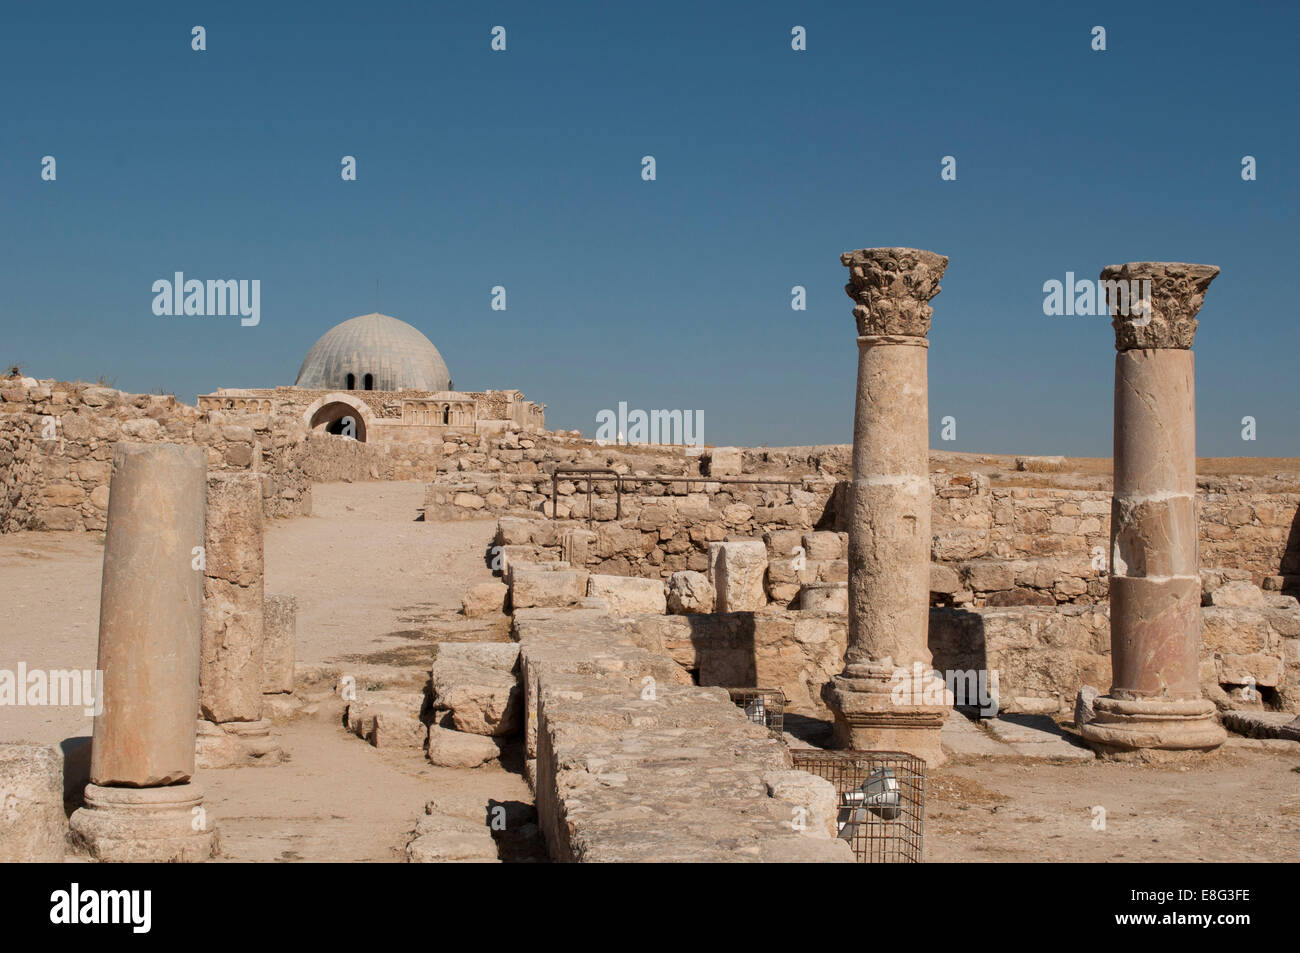 Jordan: the Umayyad Palace, large palatial complex from the Umayyad period on the Citadel of Amman, built during the first half of 8th century Stock Photo